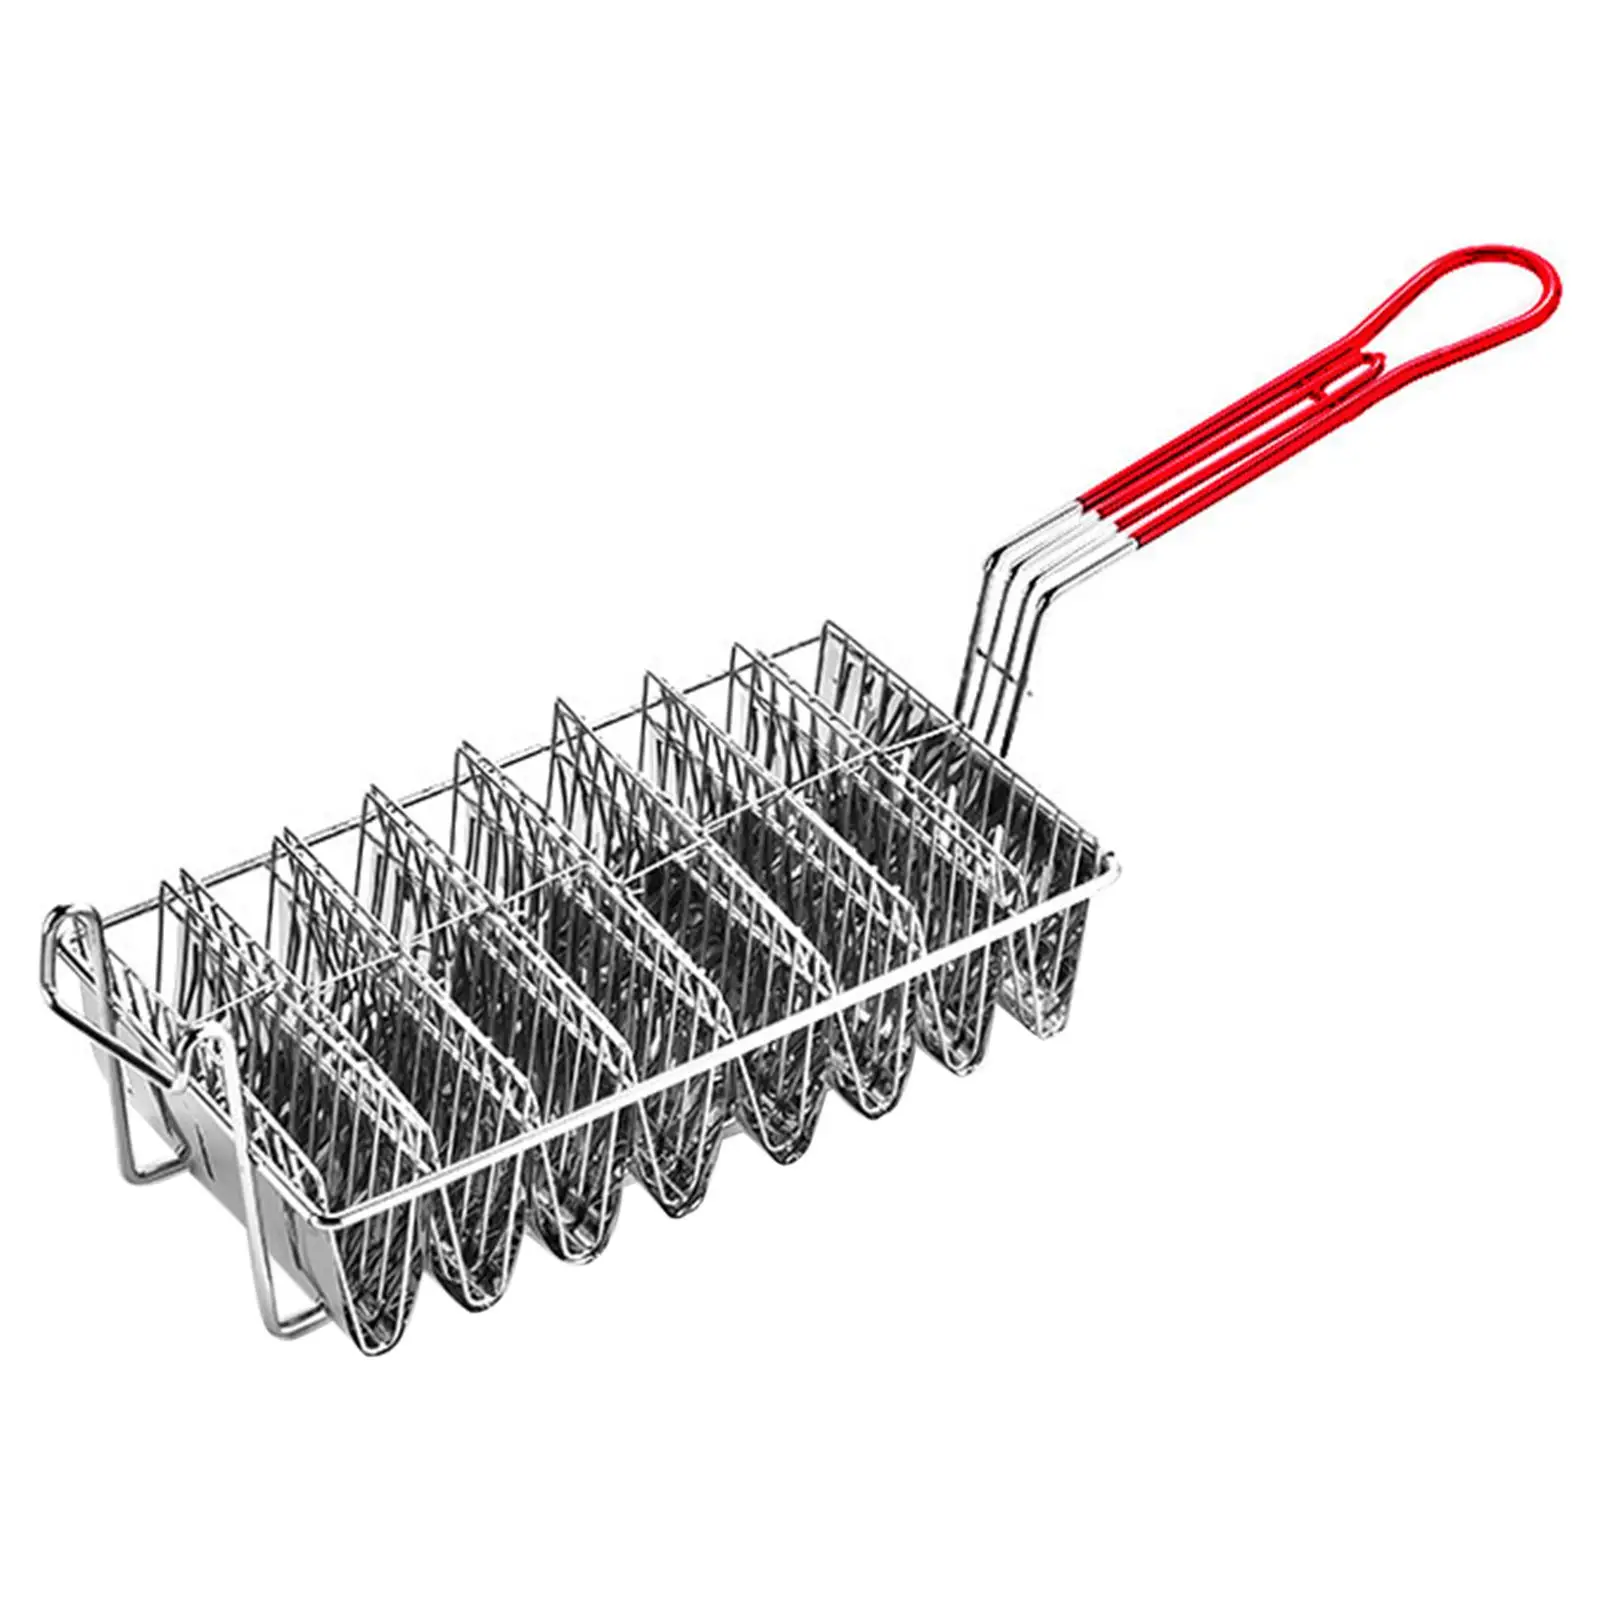 Stainless Steel   Cake Toast Holder French Fries with Grip Handle  Fryer Basket  Bowl Shell Maker Kitchen Fried Basket